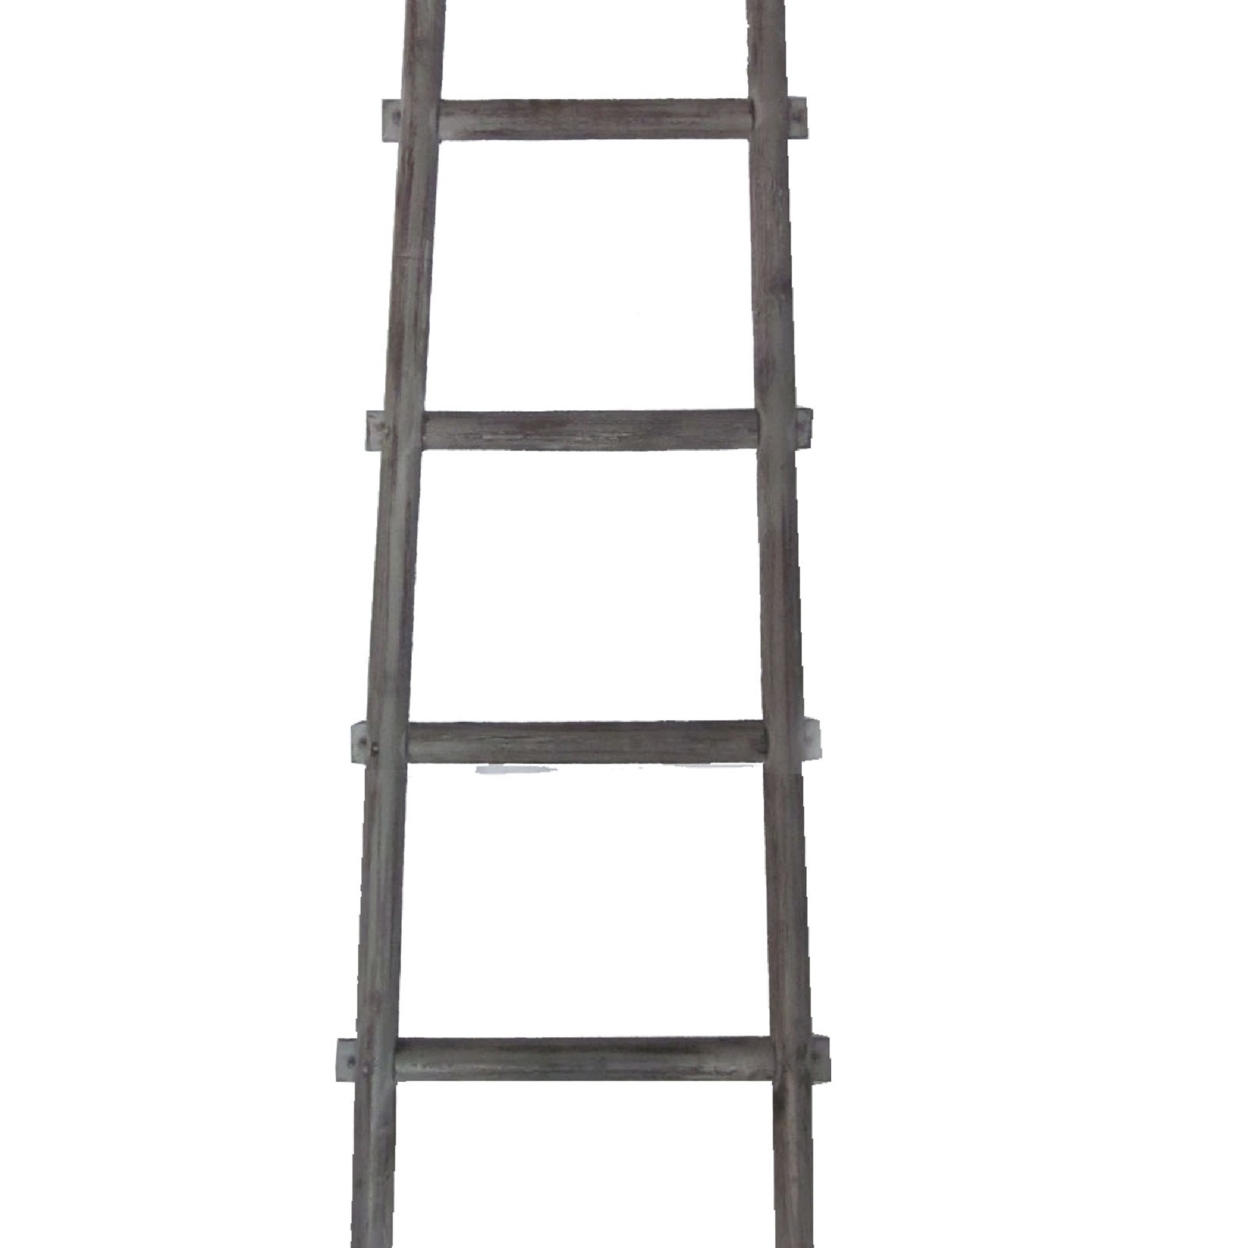 Transitional Style Wooden Decor Ladder With 5 Steps, Gray- Saltoro Sherpi